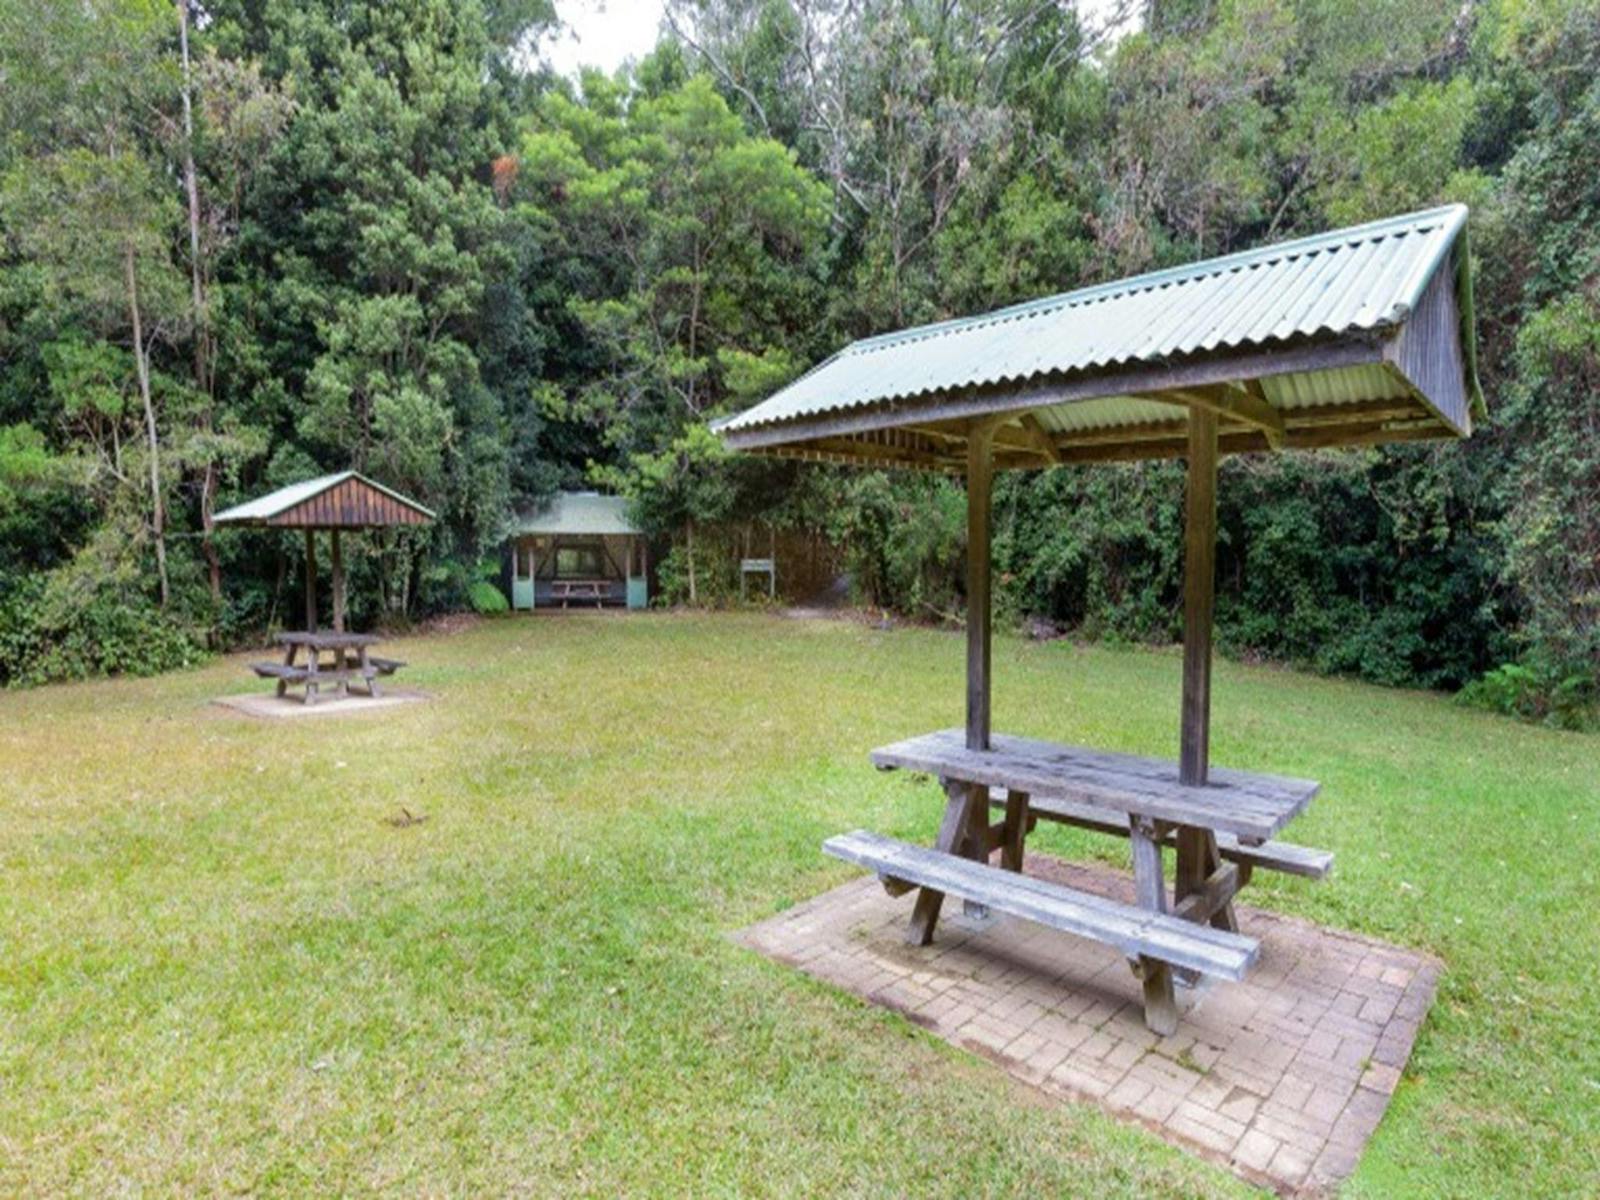 Picnic shelters at Coachwood picnic area in Washpool National Park. Photo: Rob Cleary © OEH